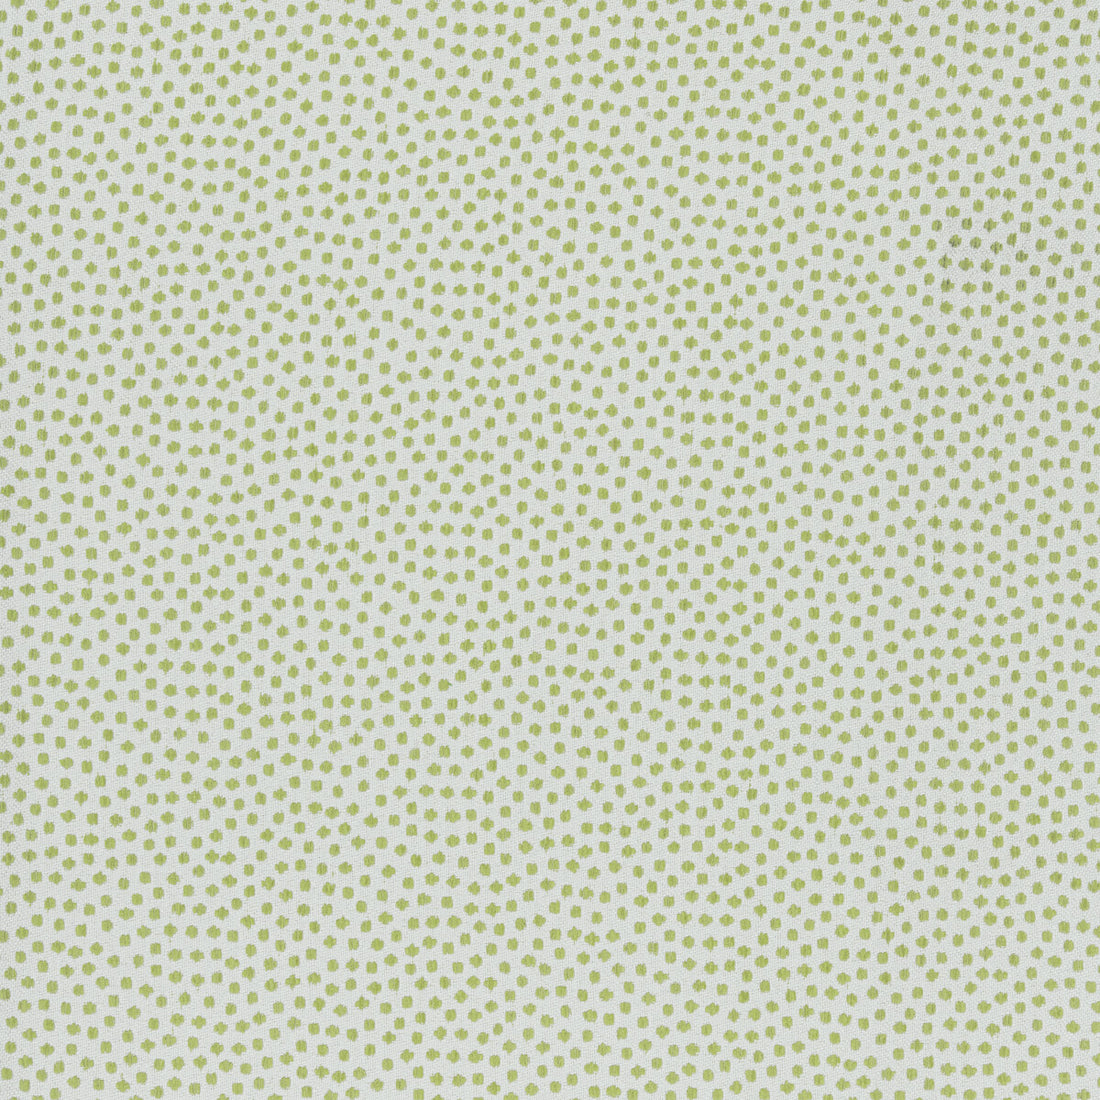 Kravet Design fabric in 36085-31 color - pattern 36085.31.0 - by Kravet Design in the Inside Out Performance Fabrics collection